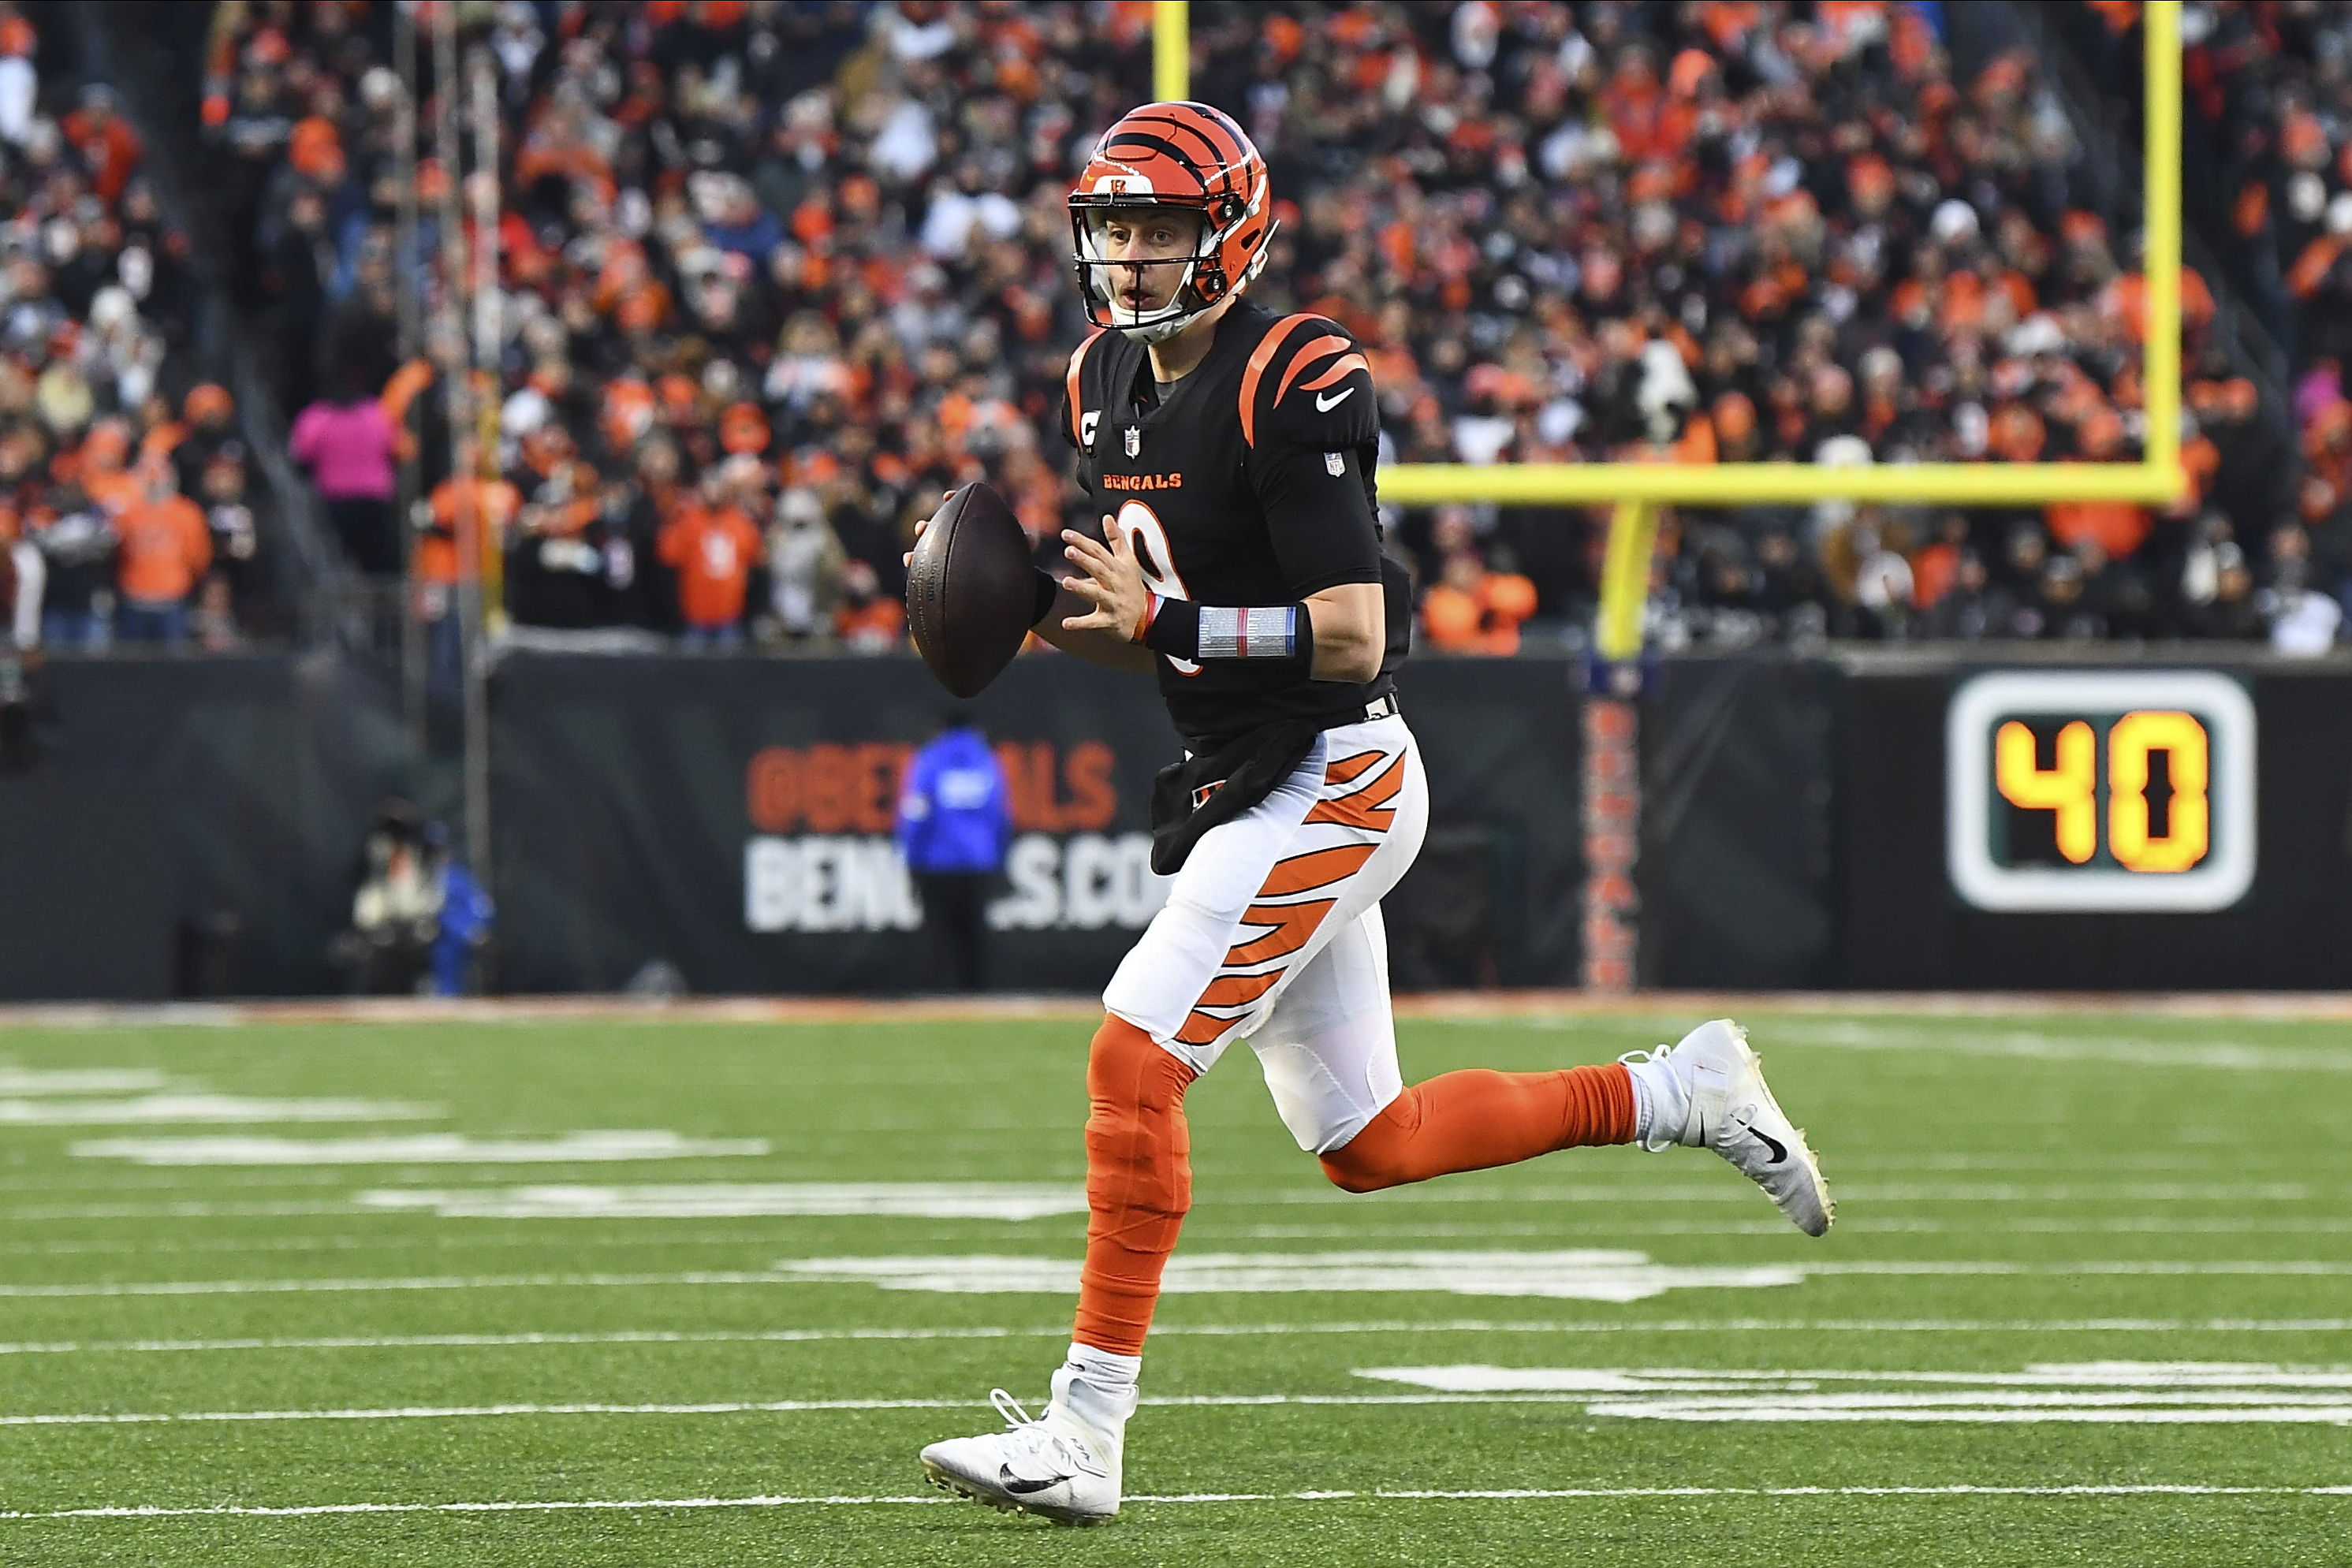 Bengals' next playoff game will be against Titans Saturday